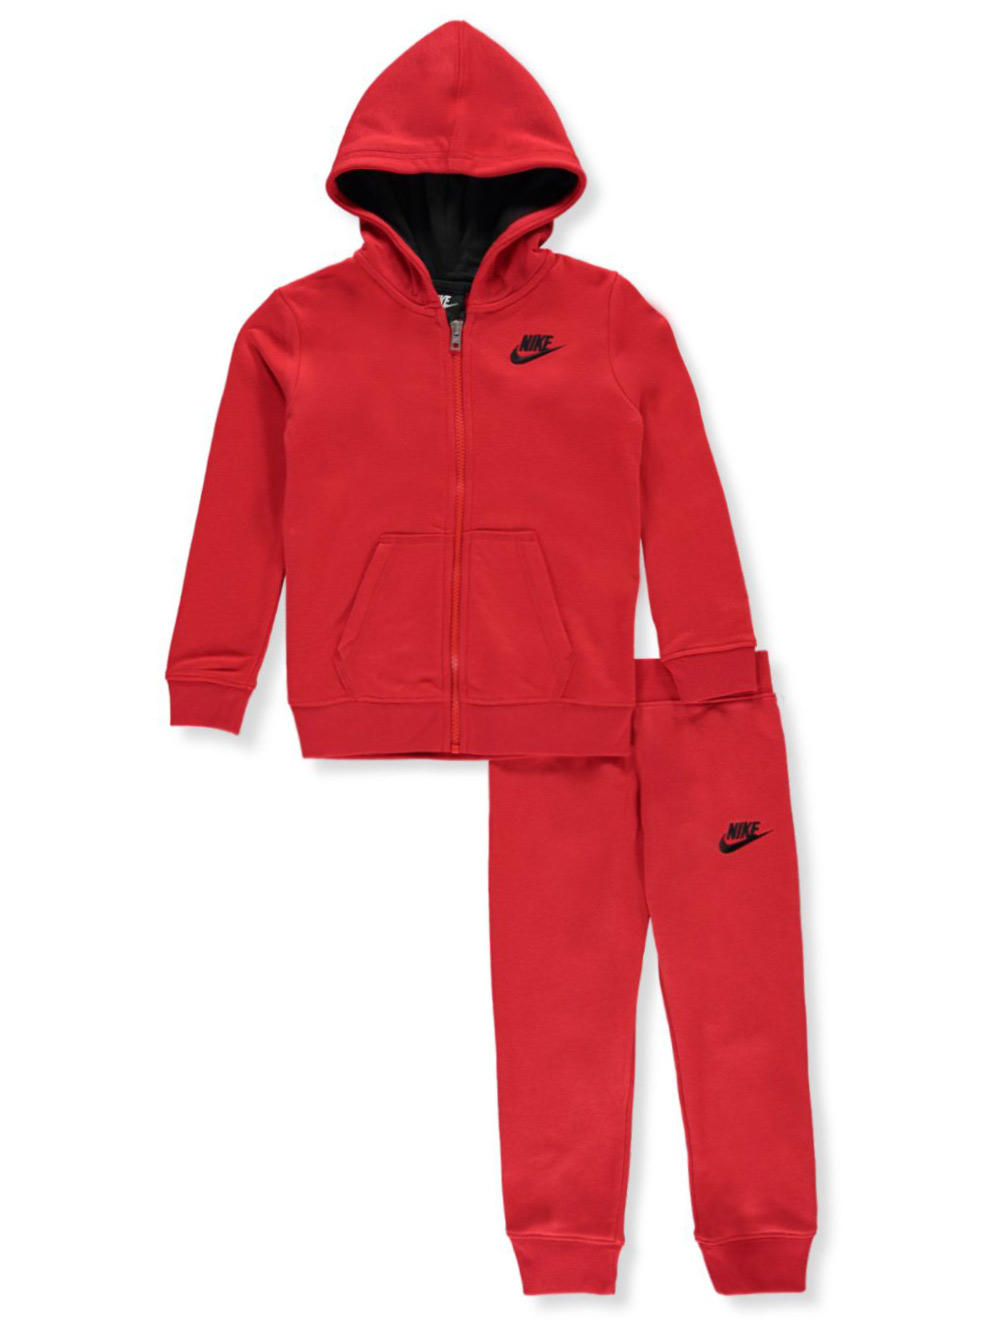 all red nike suit